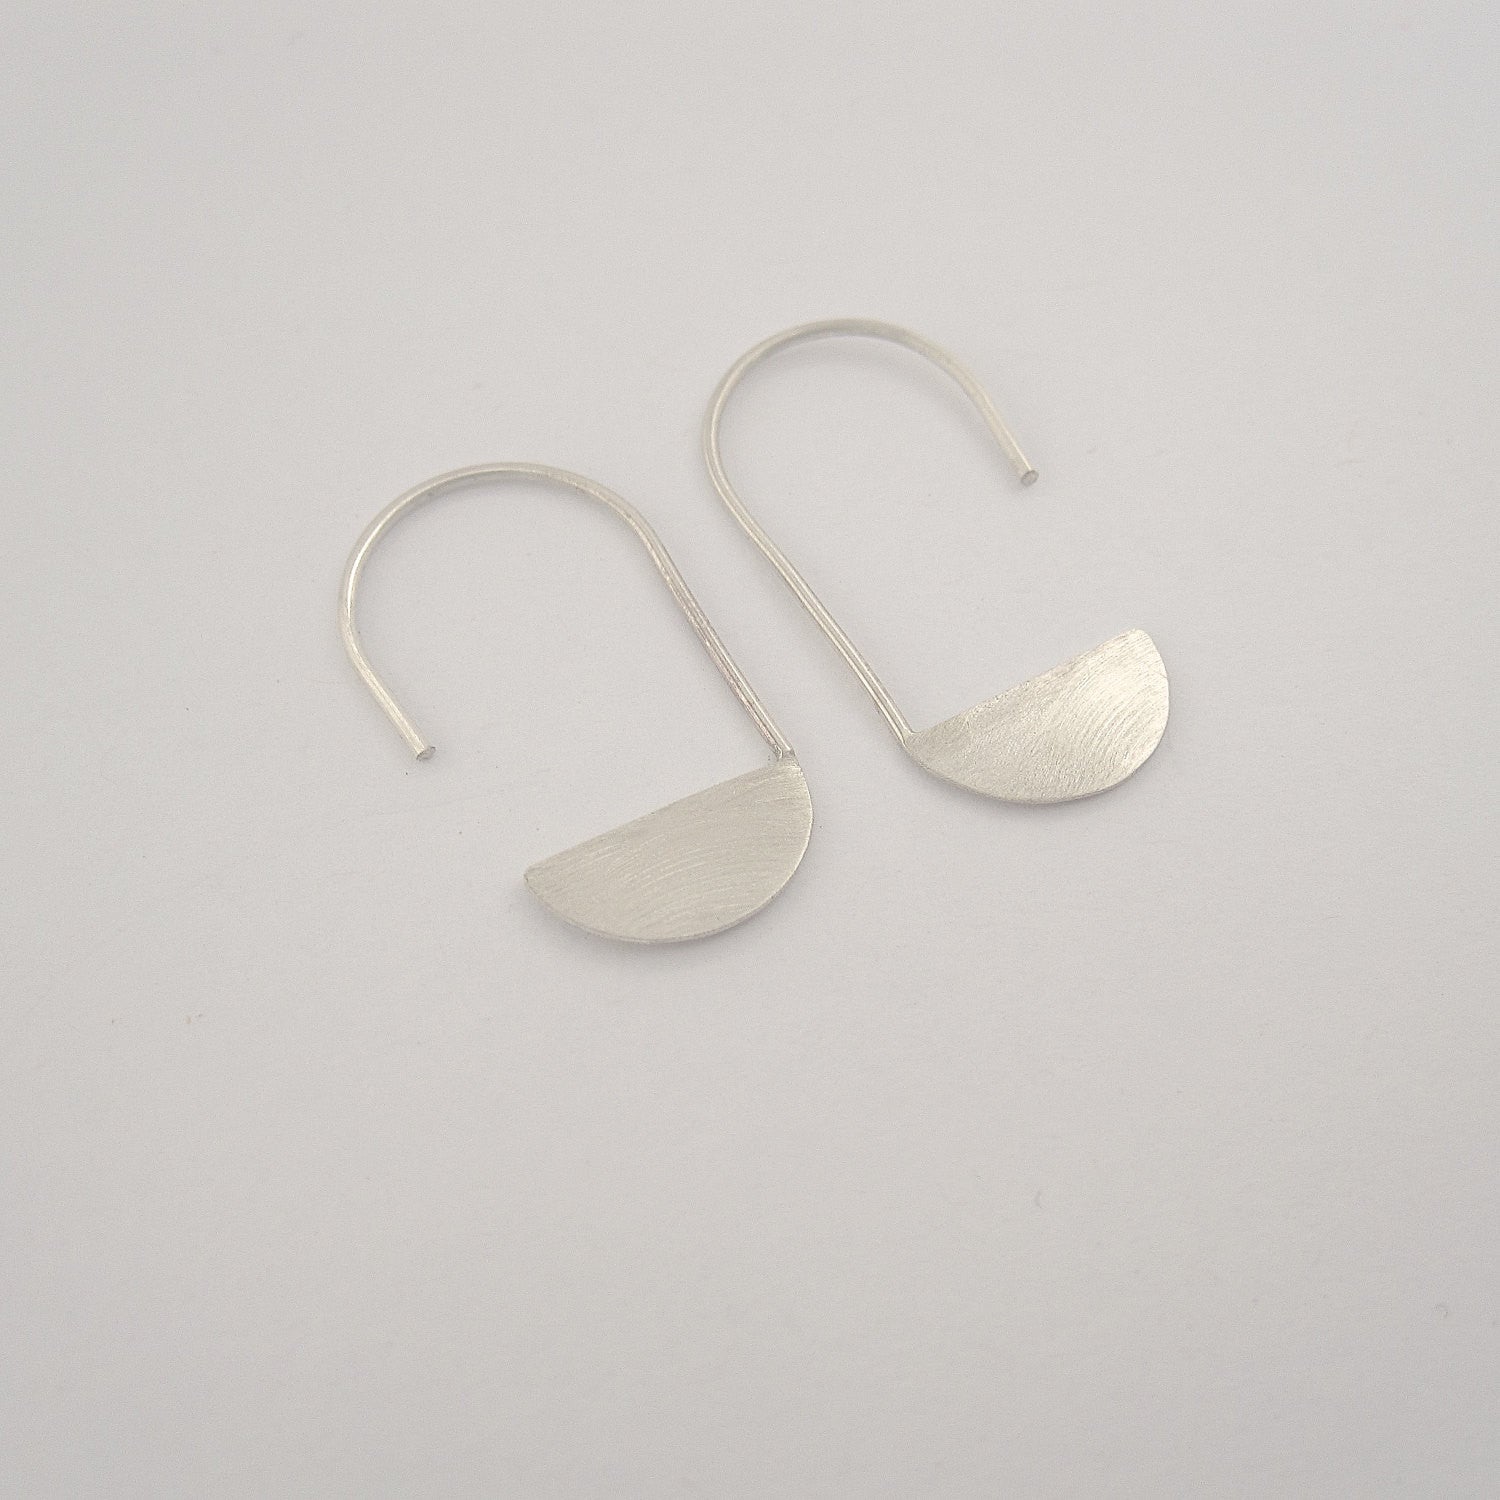 A Contemporary, Hand-Made Take on the Classic Design,  Crescent Moon Dangle Earrings - 0136